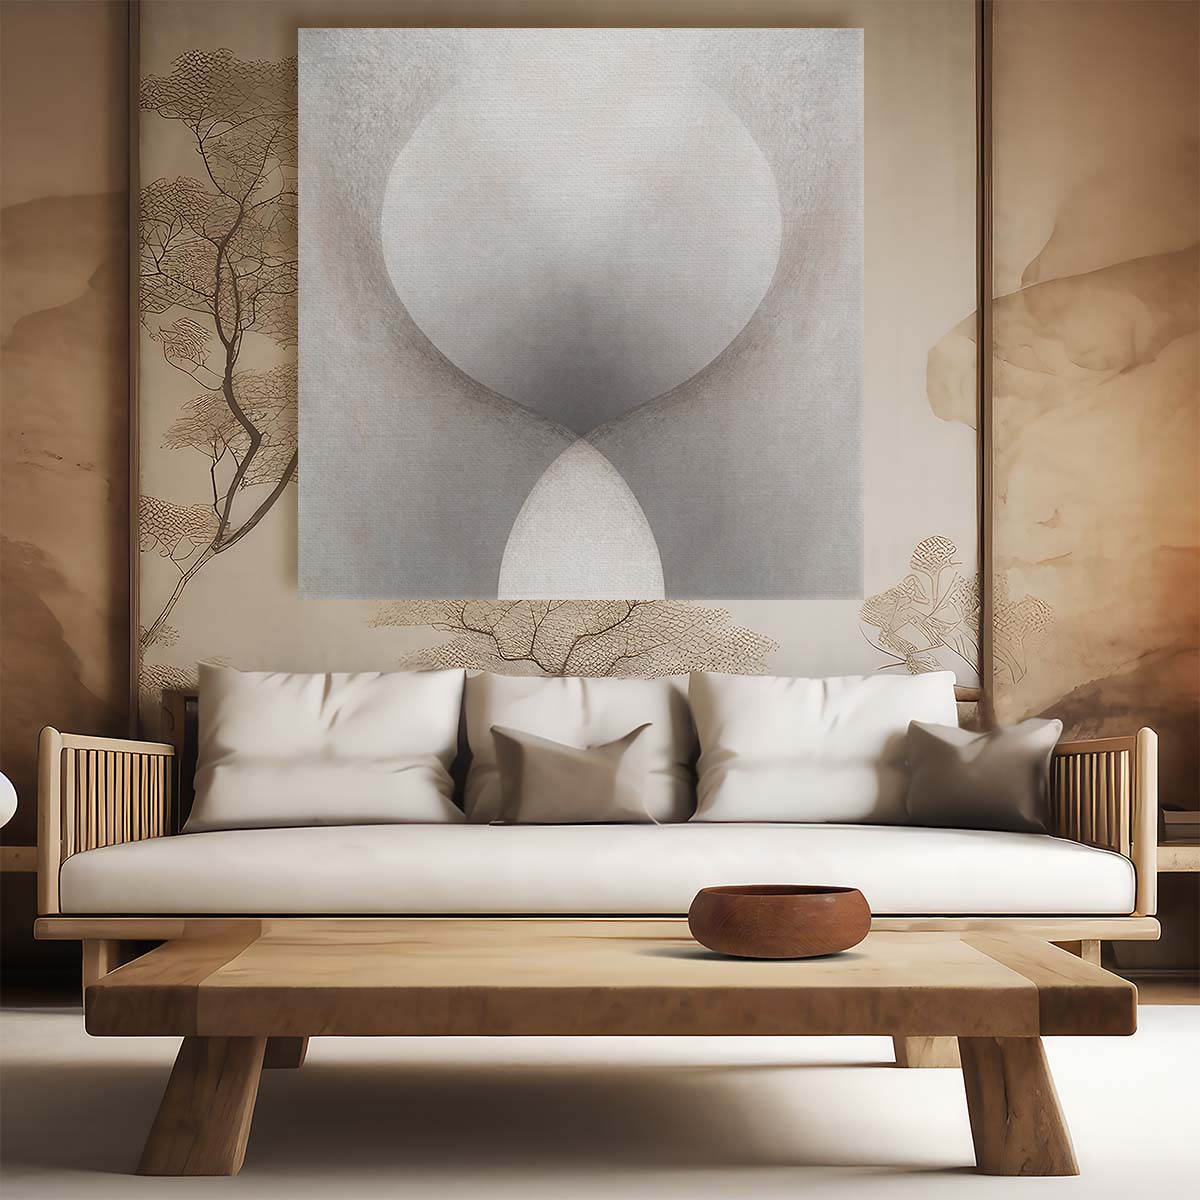 Symmetric Shapes Abstract Geometric Suprematism Photography Wall Art by Luxuriance Designs. Made in USA.